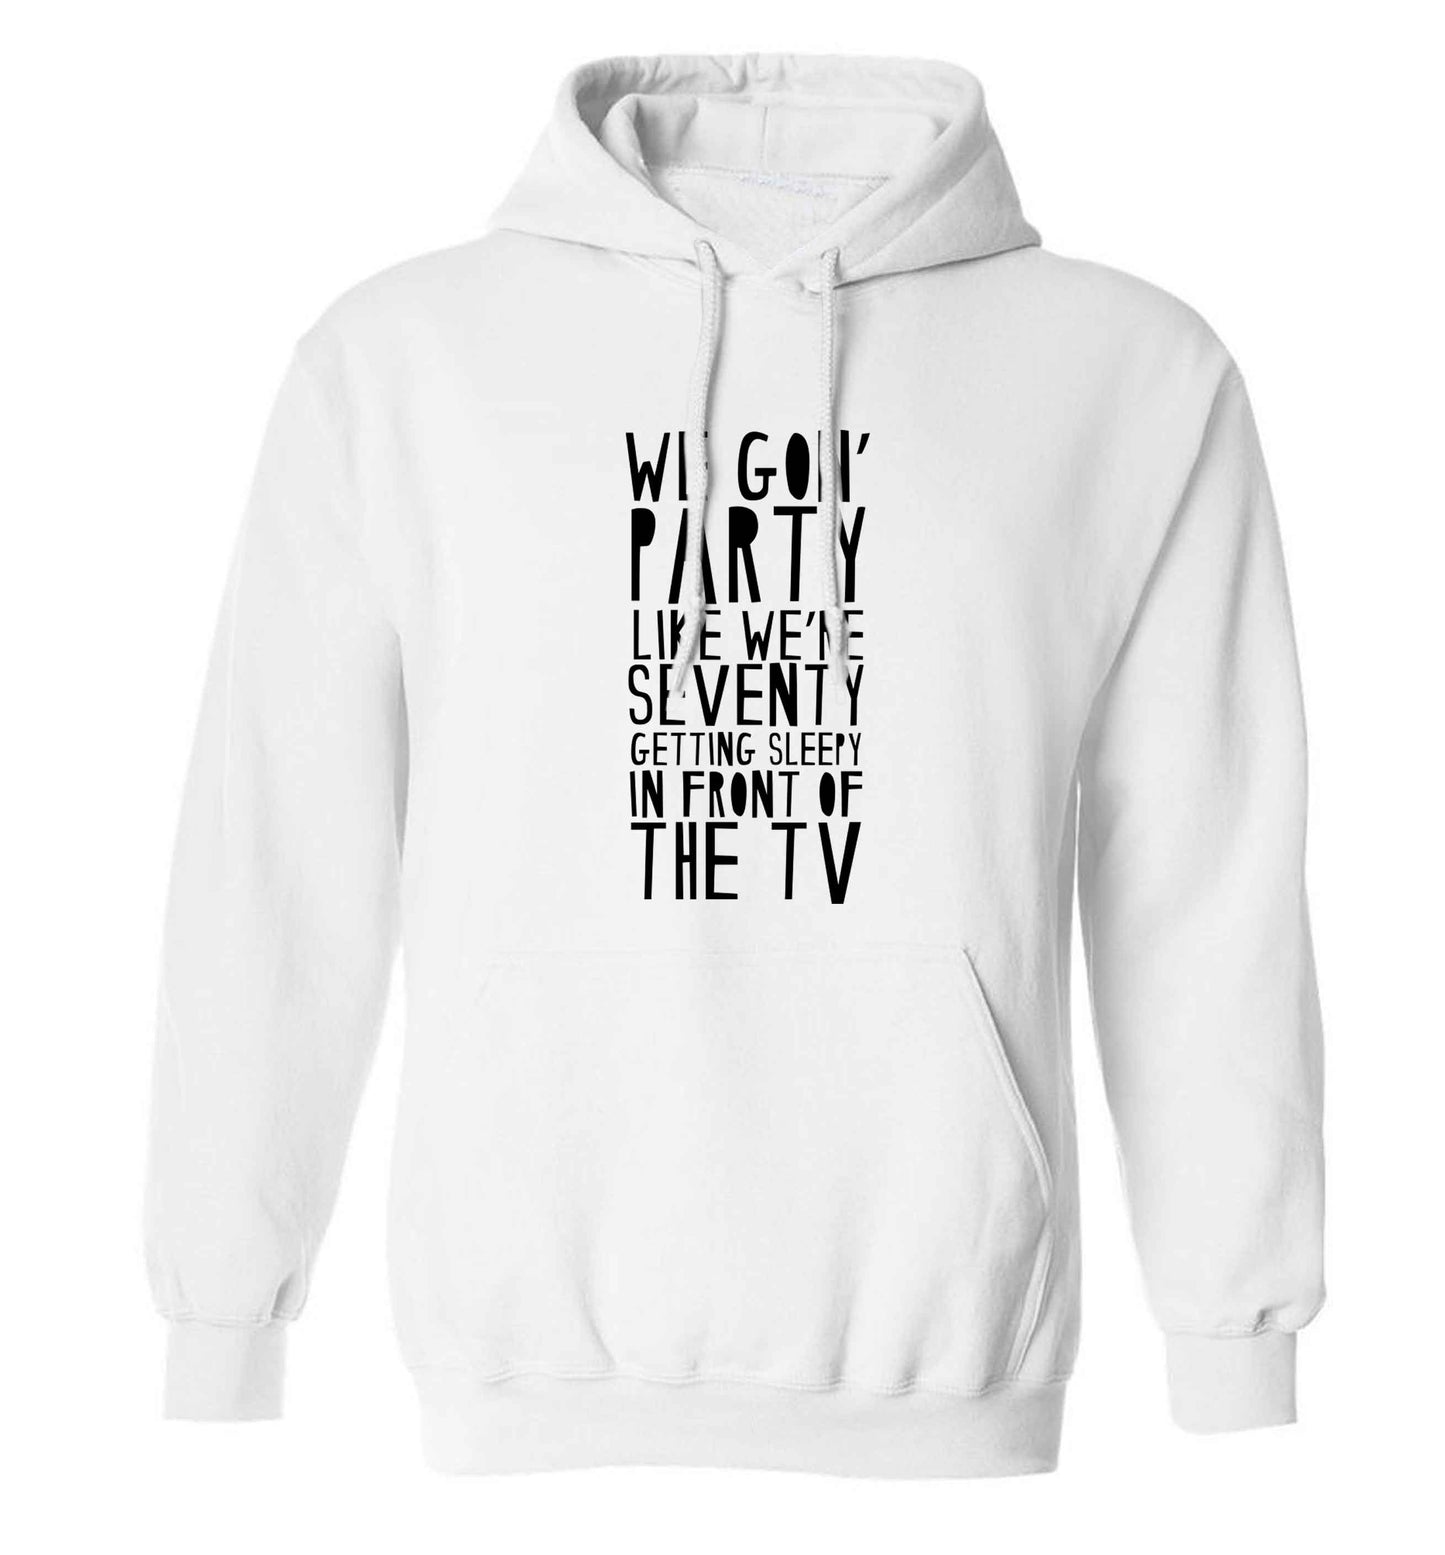 We gon' party like we're seventy getting sleepy in front of the TV adults unisex white hoodie 2XL